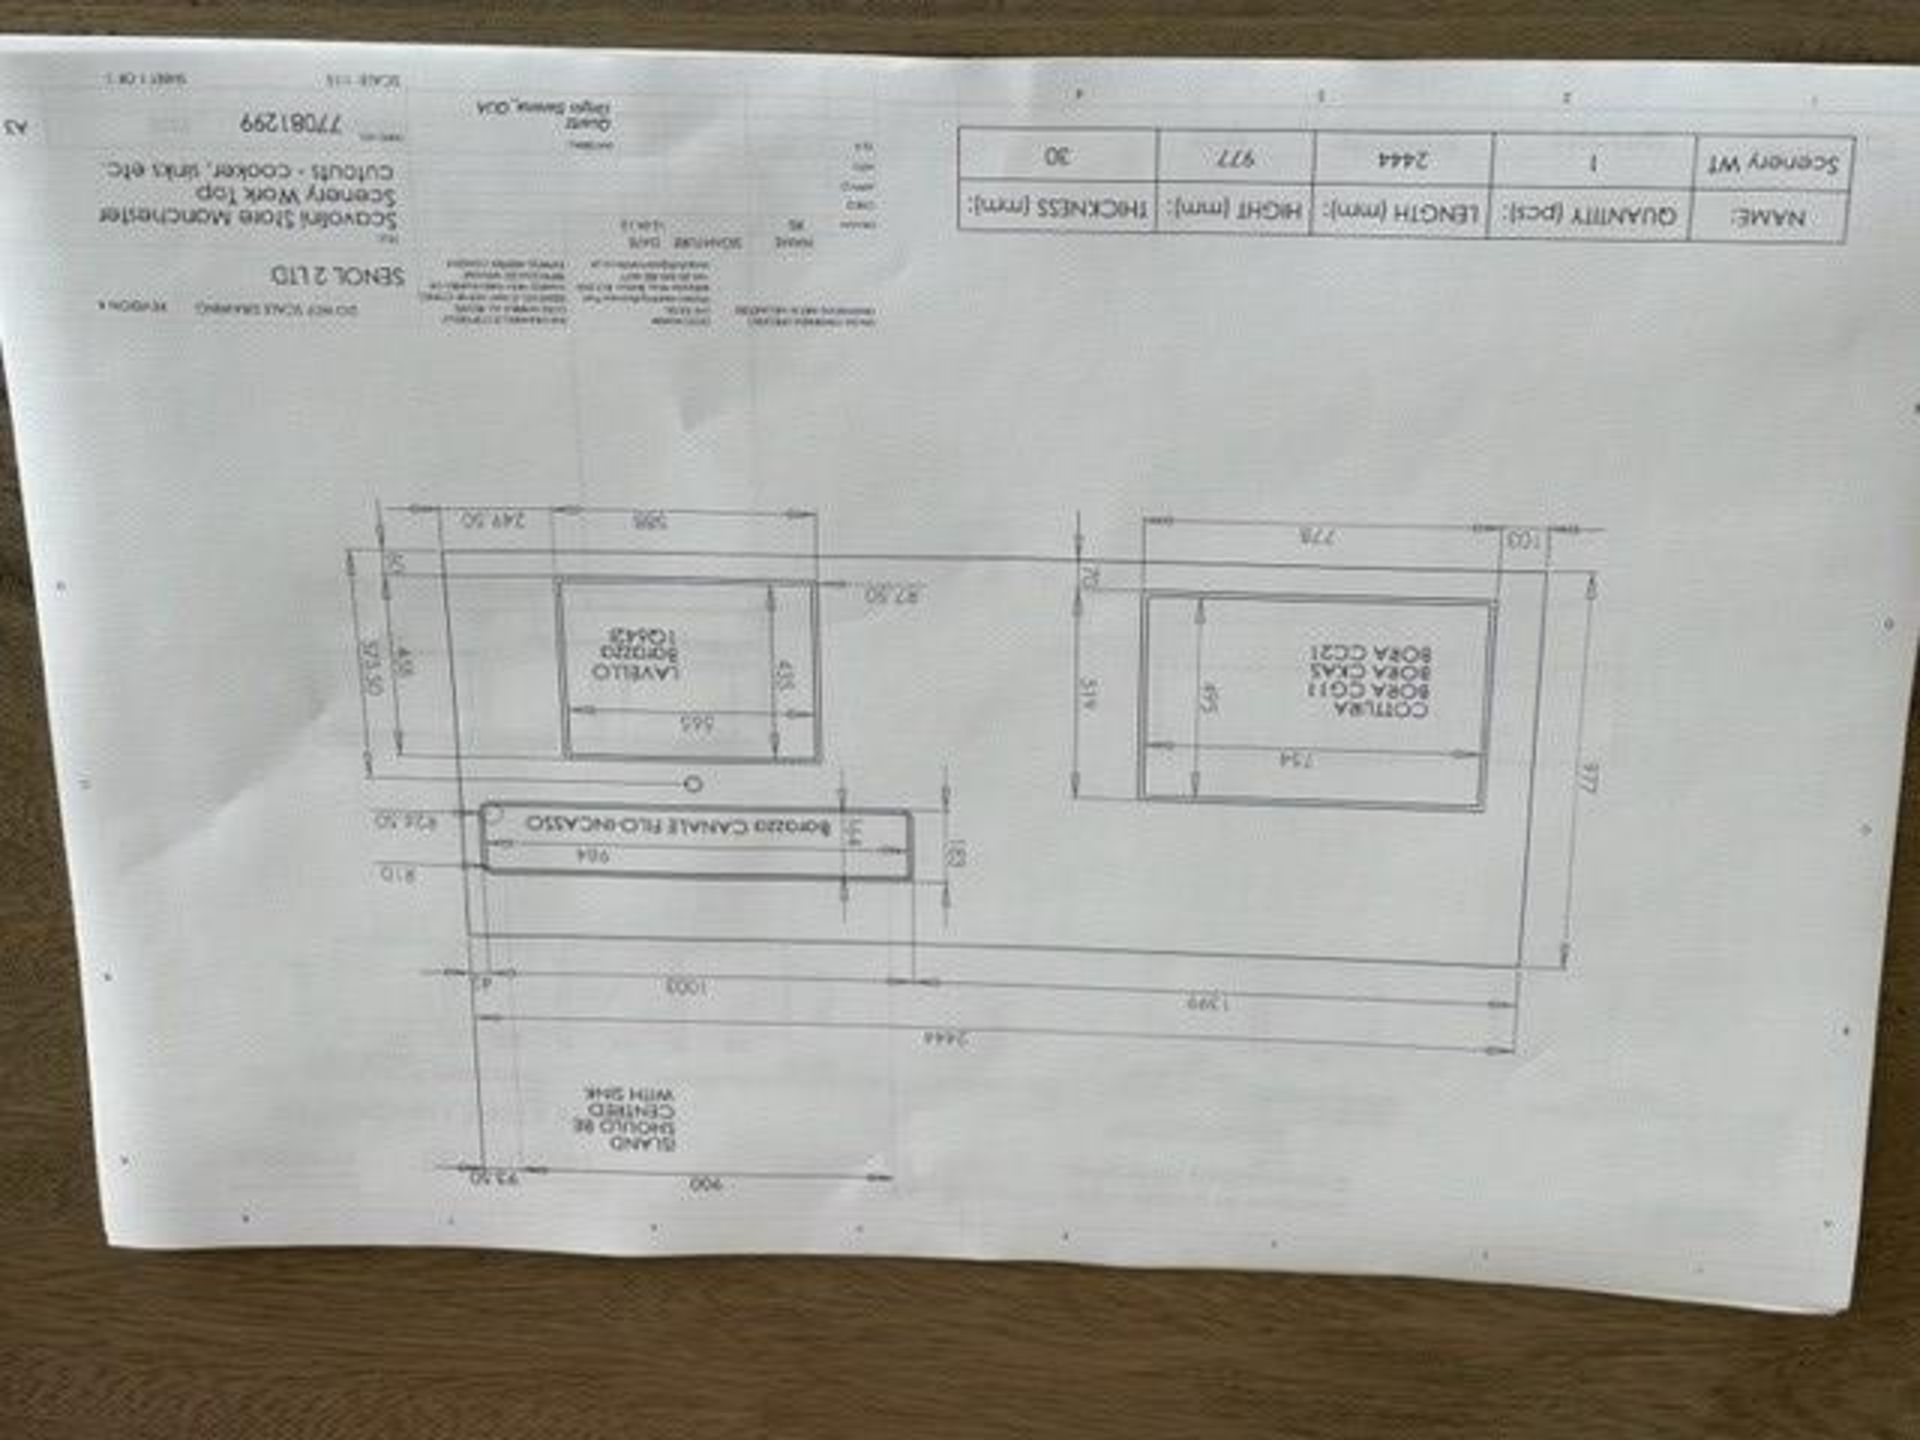 This is KITCHEN NO 2. SCAVOLINI SCENERY Please see images and plan for number and size of the - Bild 7 aus 9